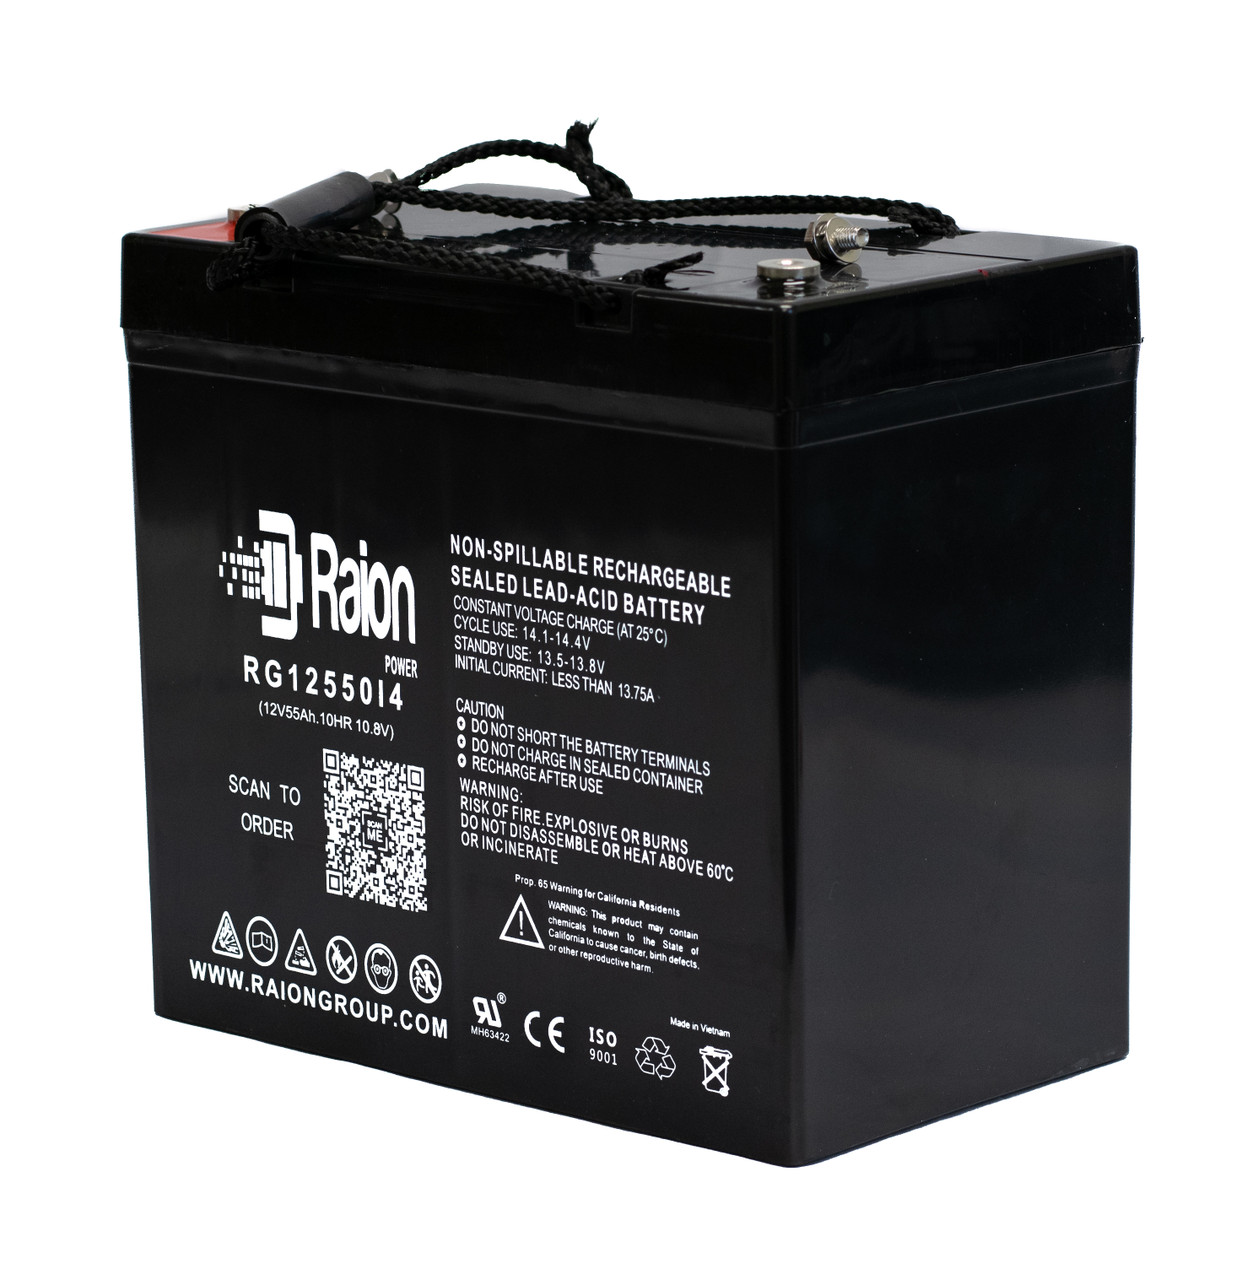 Raion Power 12V 55Ah 22NF Mobility Scooter Battery Replacement for Merits Health Products MP3R (Gemimi)